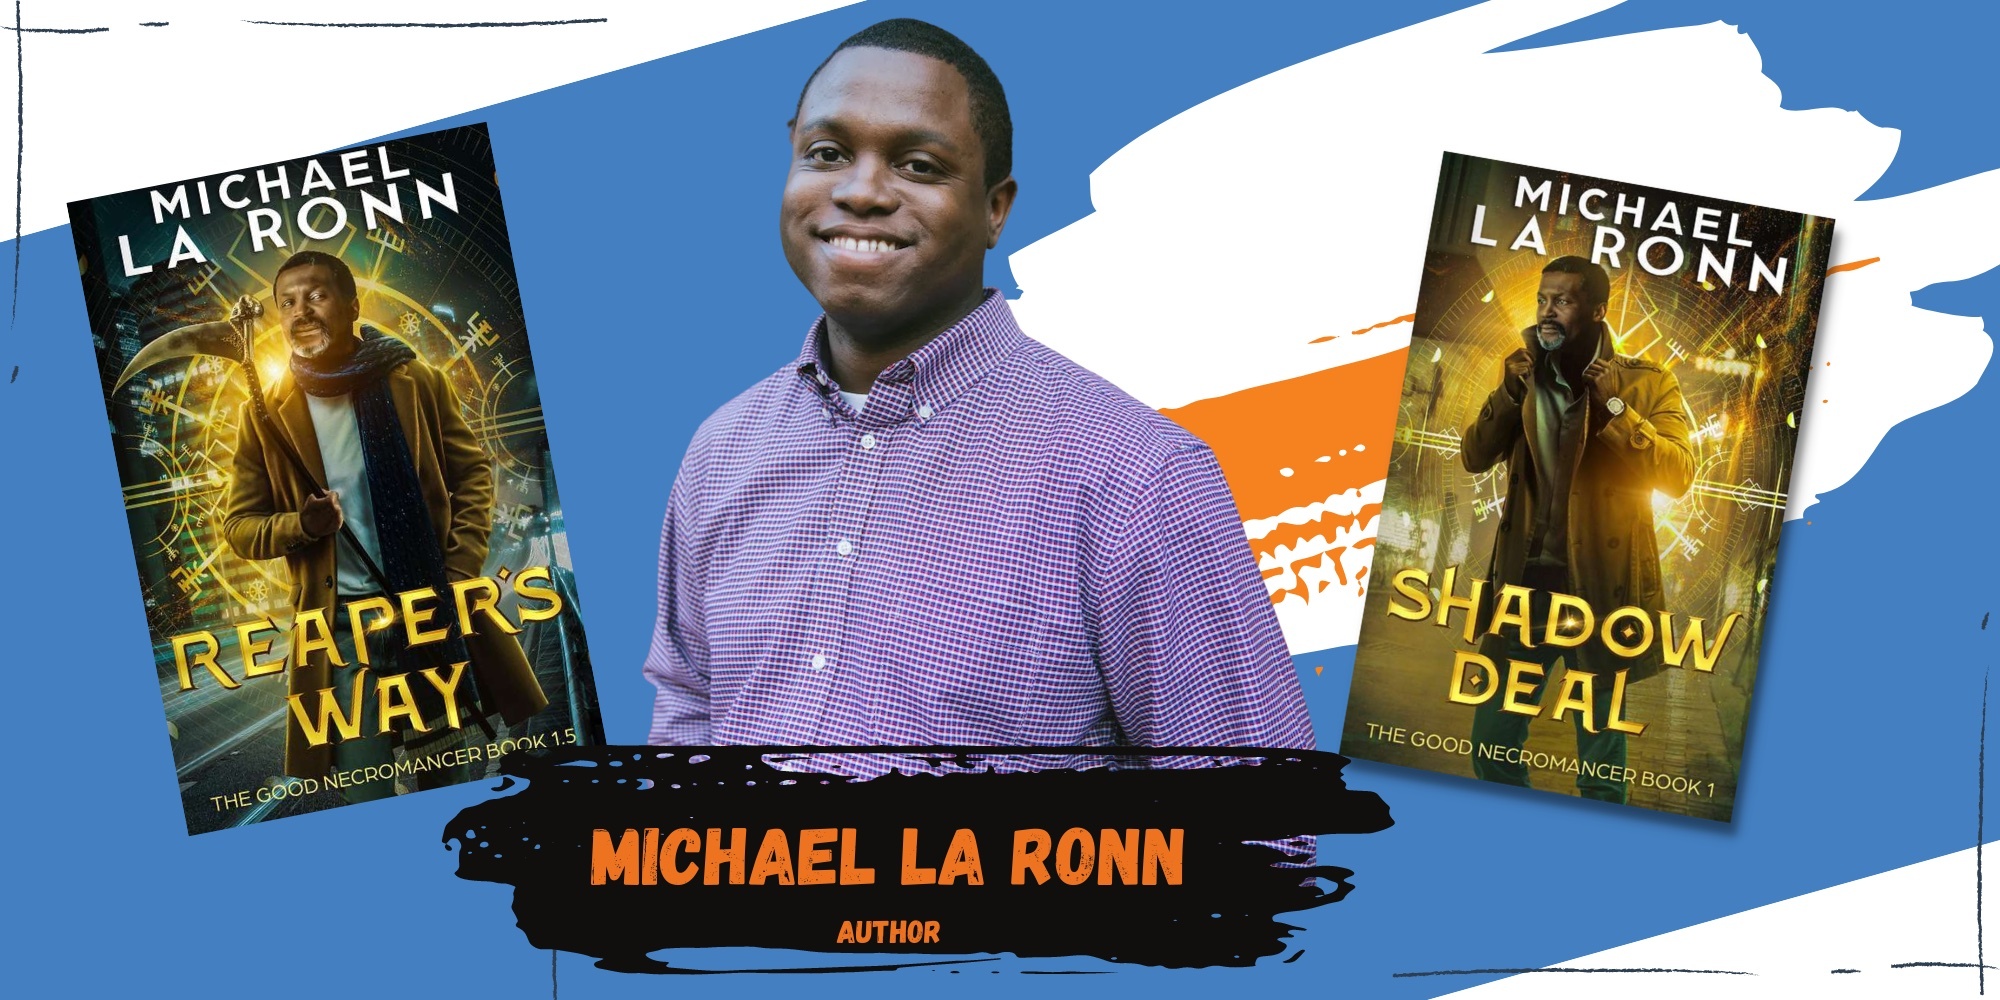 Michael La Ronn headshot with two book covers.